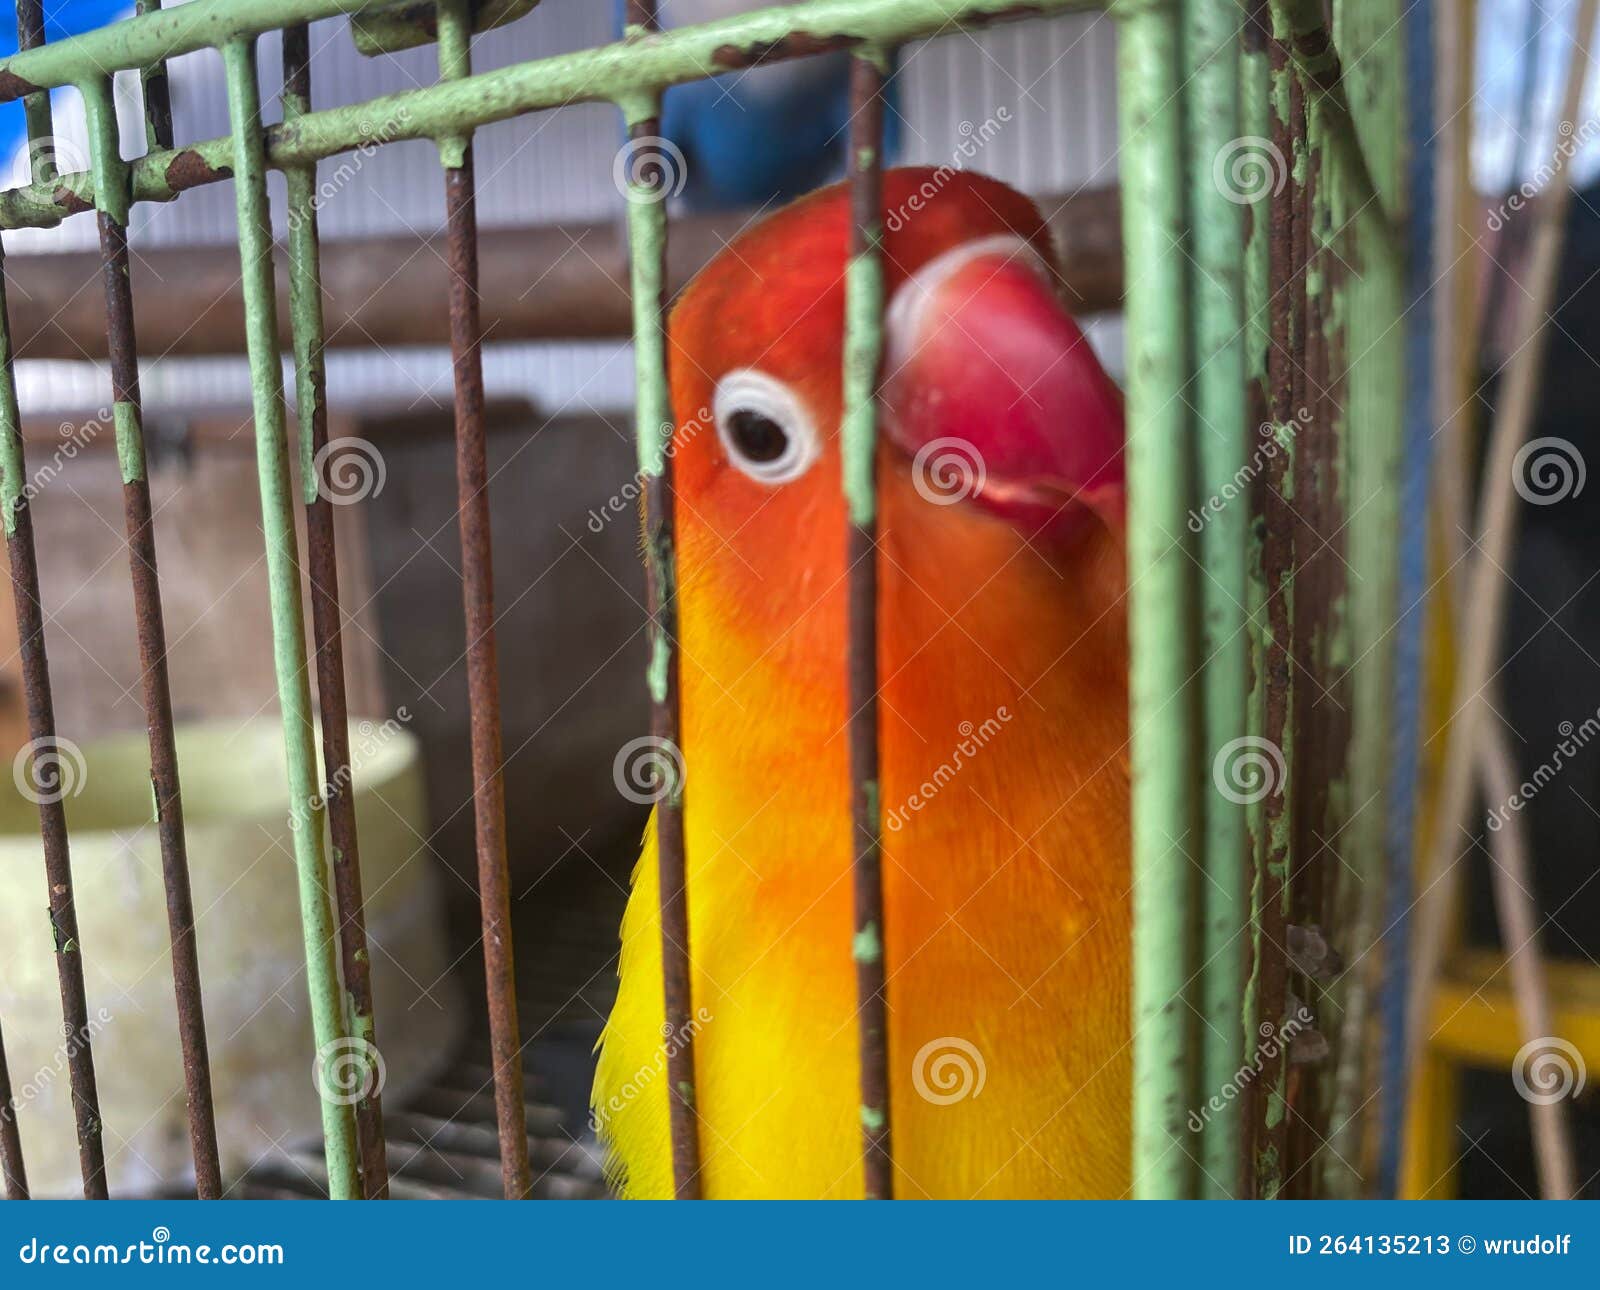 love birds in a cage. this bird has a beautiful chirp